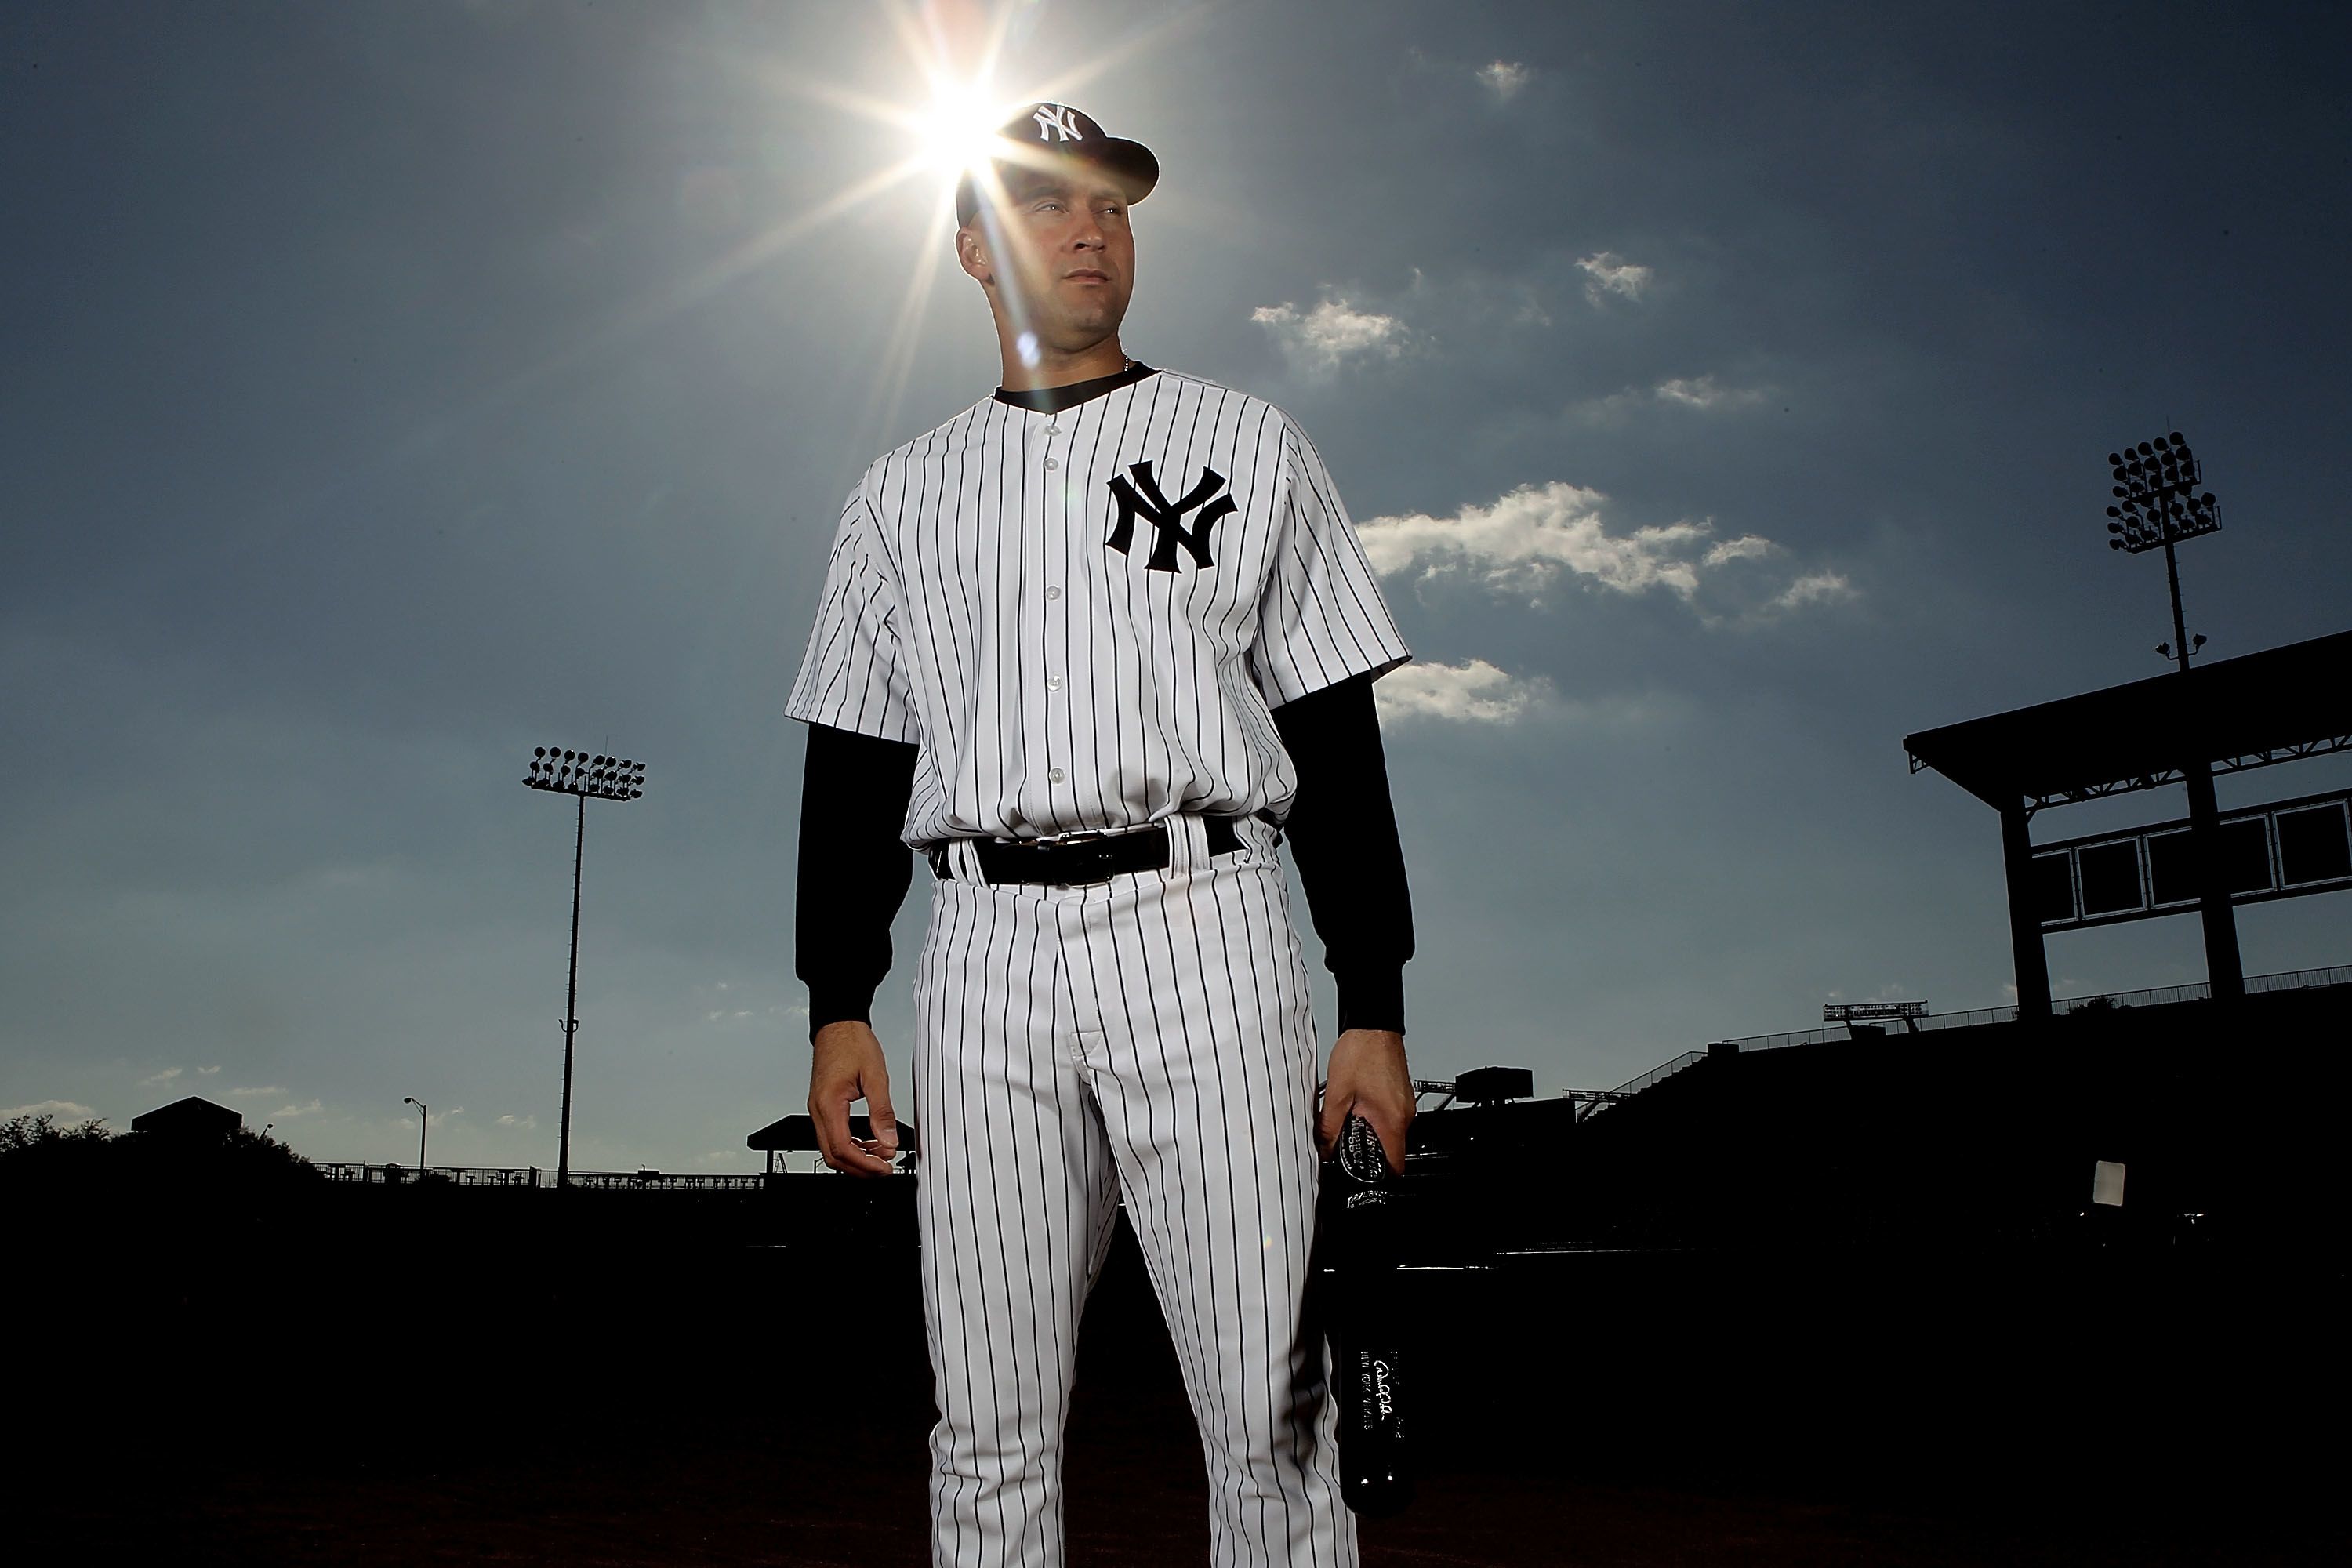 Are New Yorkers overreacting about Jeter? (Opinion)